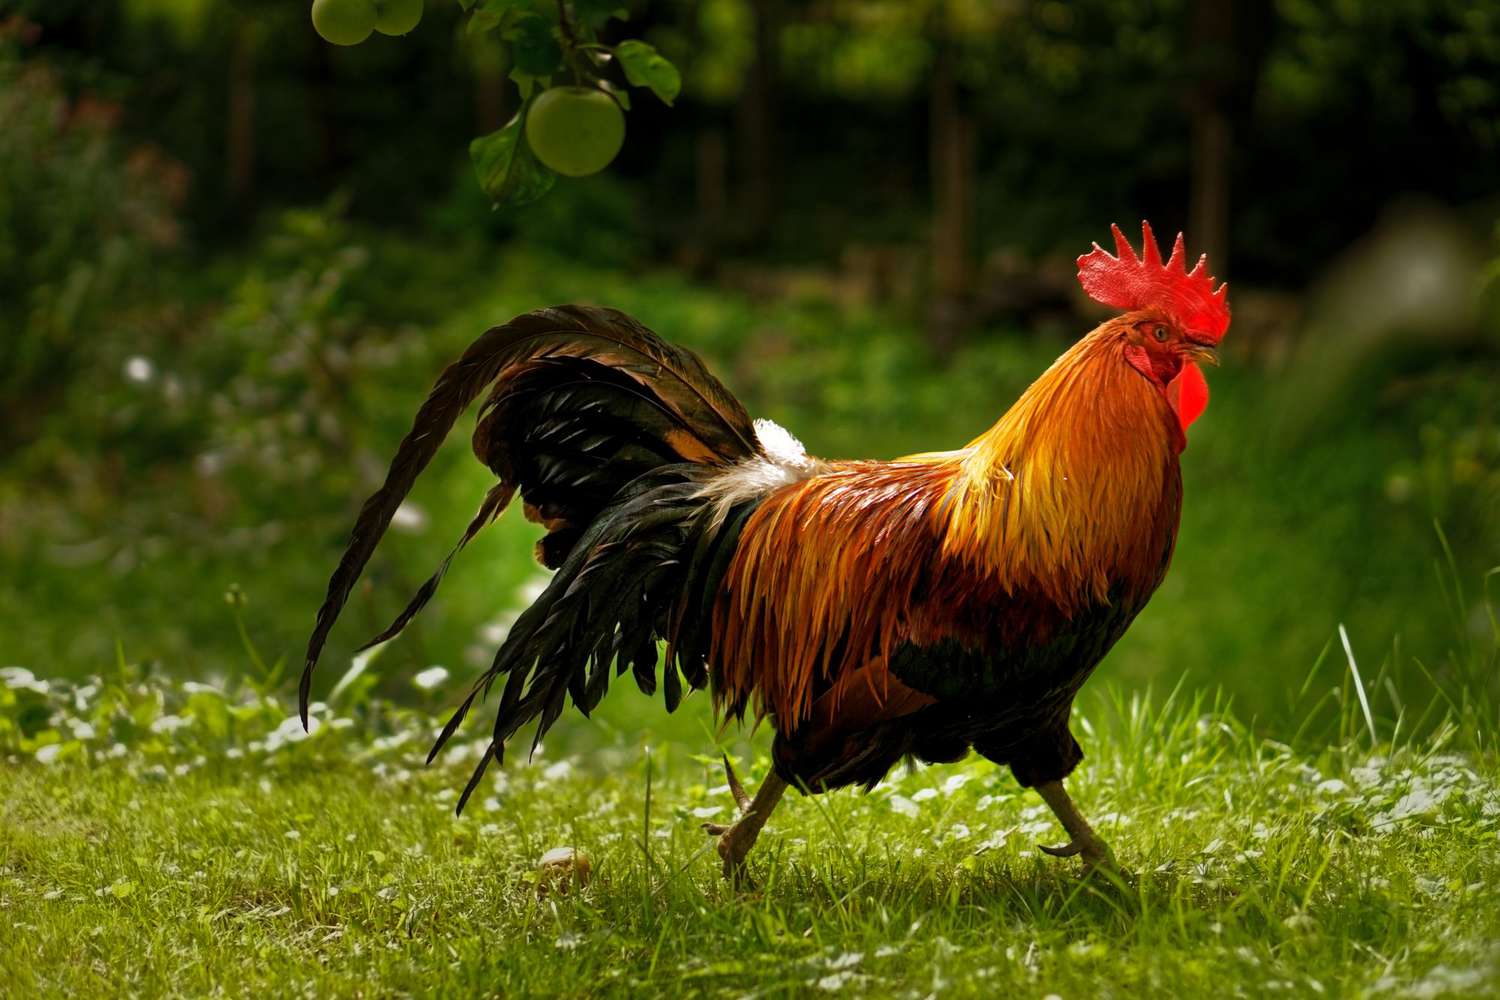 Cockfight Rooster Slices and Kills Man in India: Report | PEOPLE.com